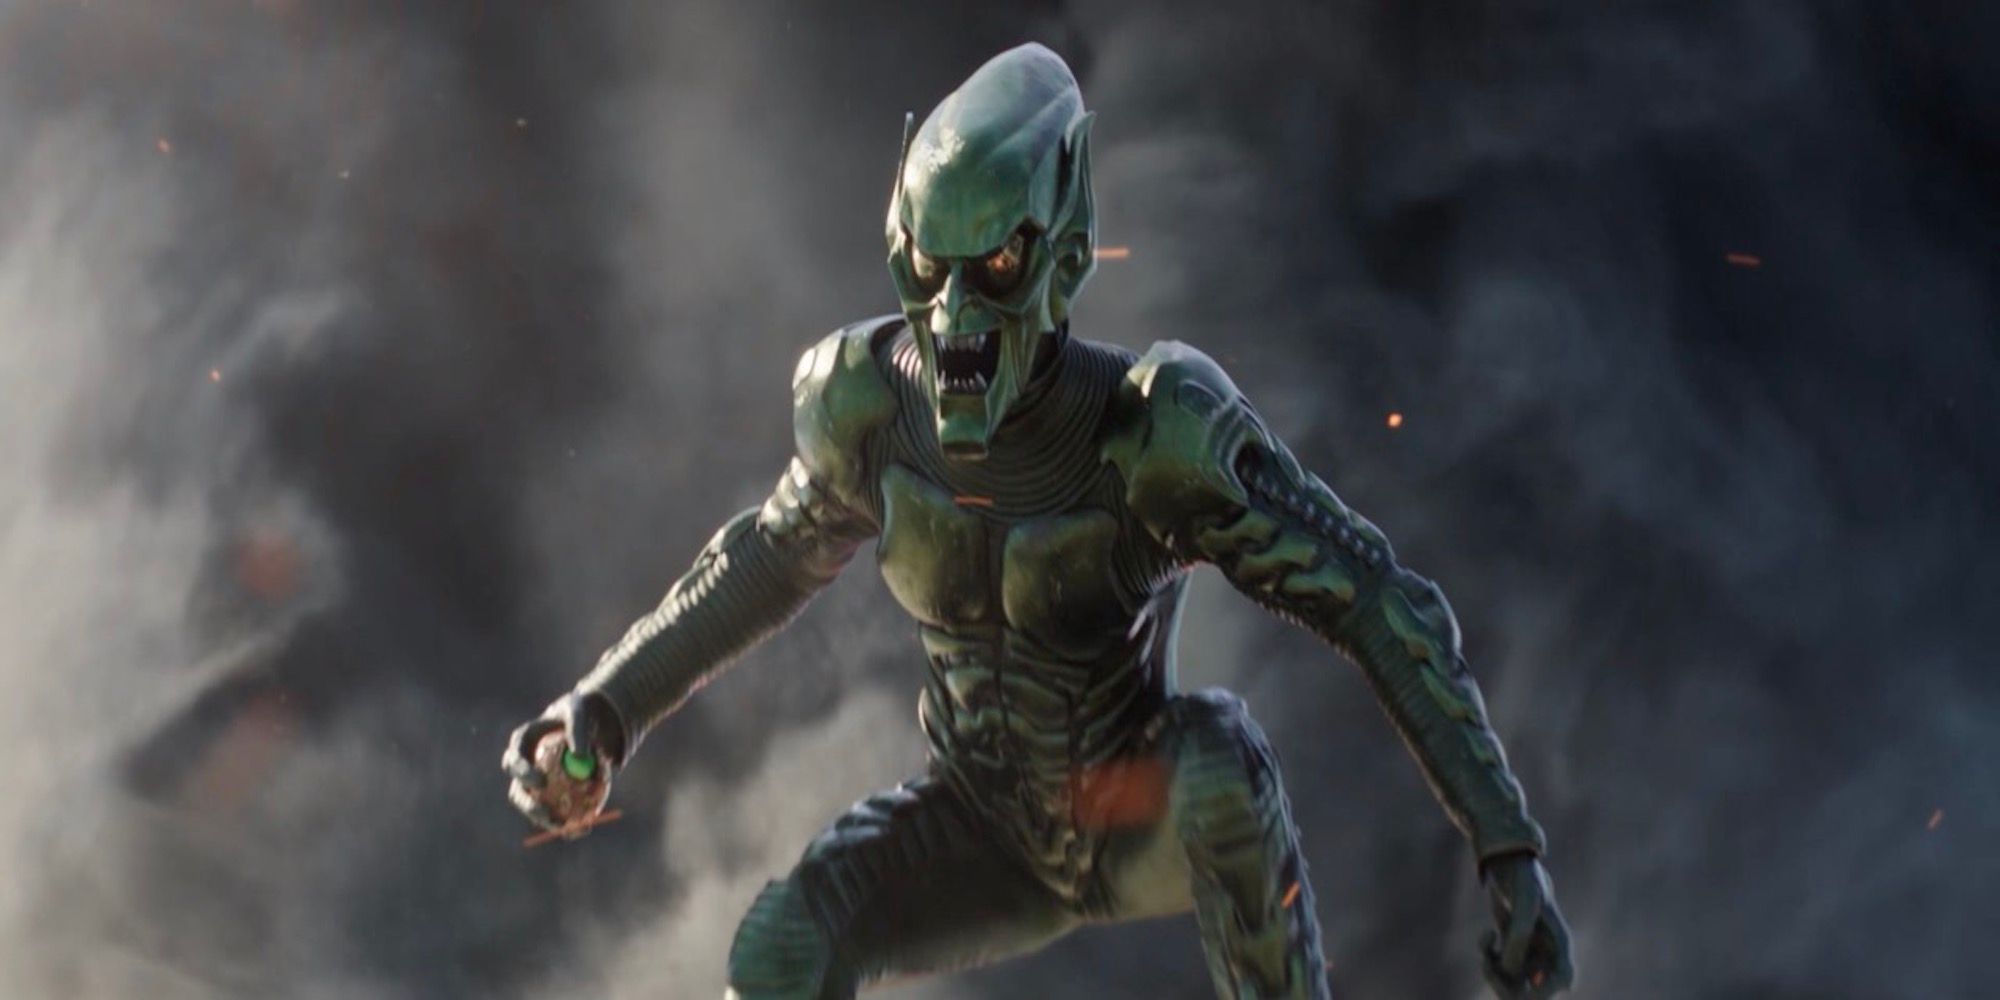 Green Goblin from Spider-Man: No Way Home